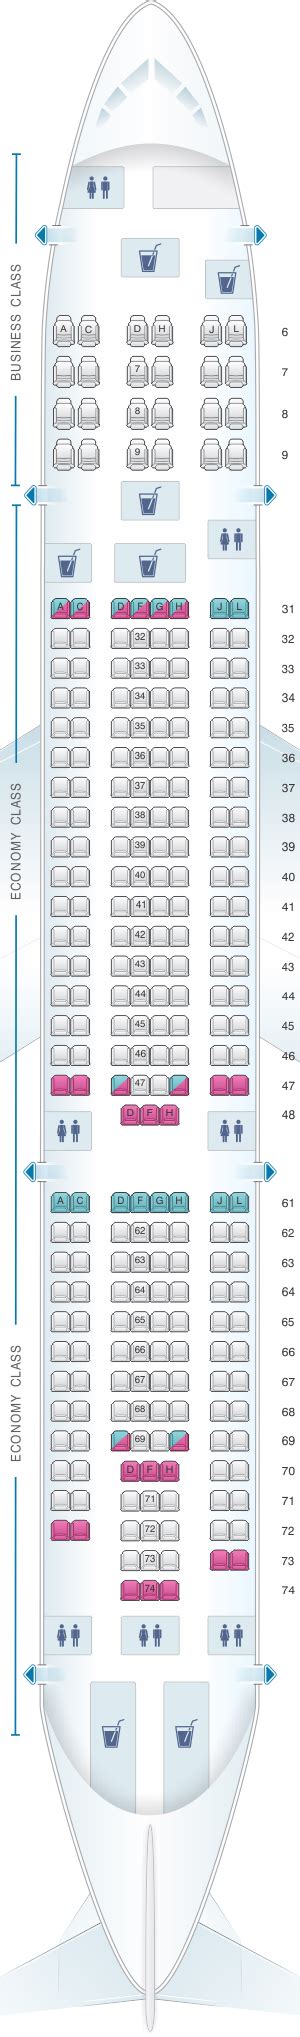 Seat Map China Eastern Airlines Airbus A330 200 Config1 Seatmaestro